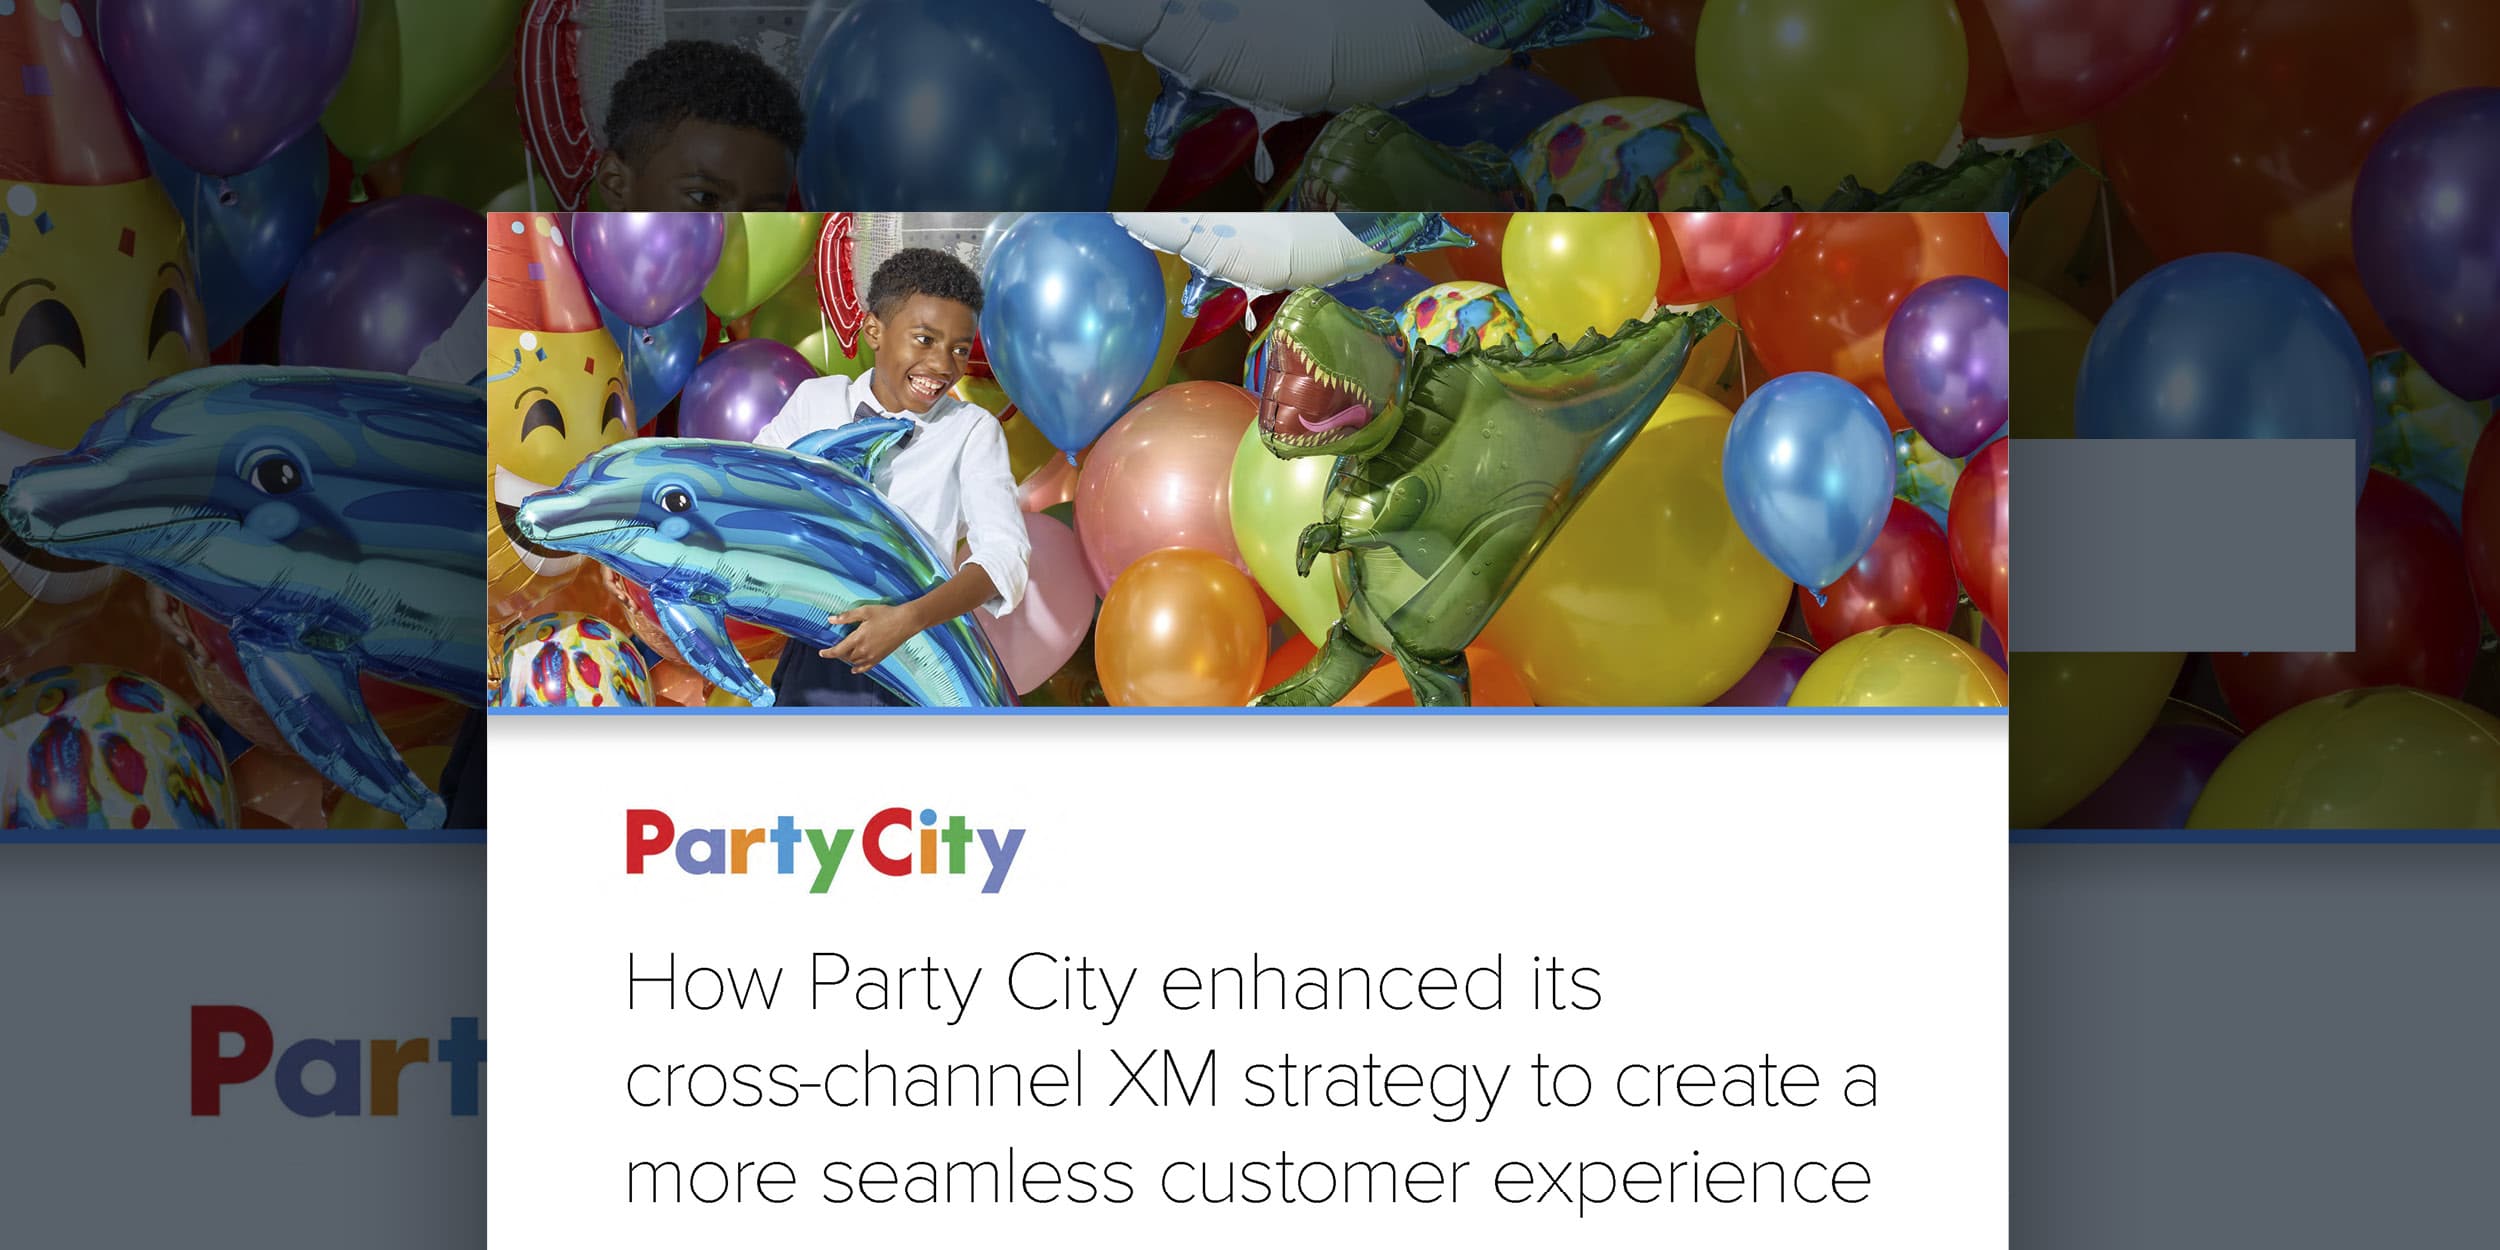 How Party City enhanced its cross-channel XM strategy to create a more seamless customer experience